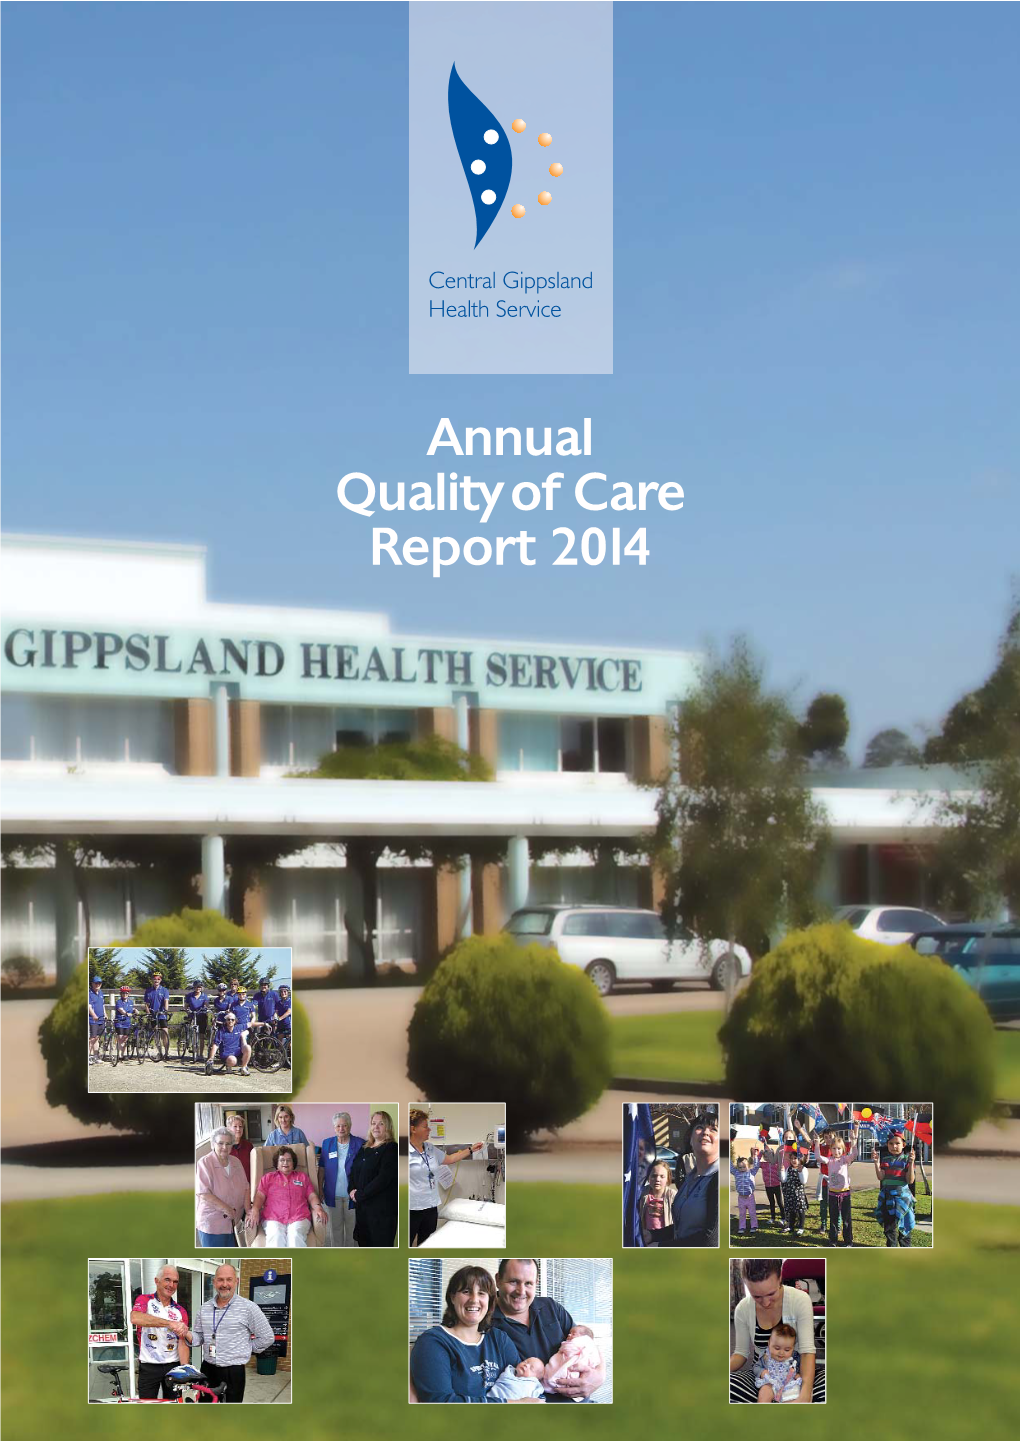 Central Gippsland Health Service Quality of Care Report 2014 1 Who We Are Embedded in the ‘Active Service Model’